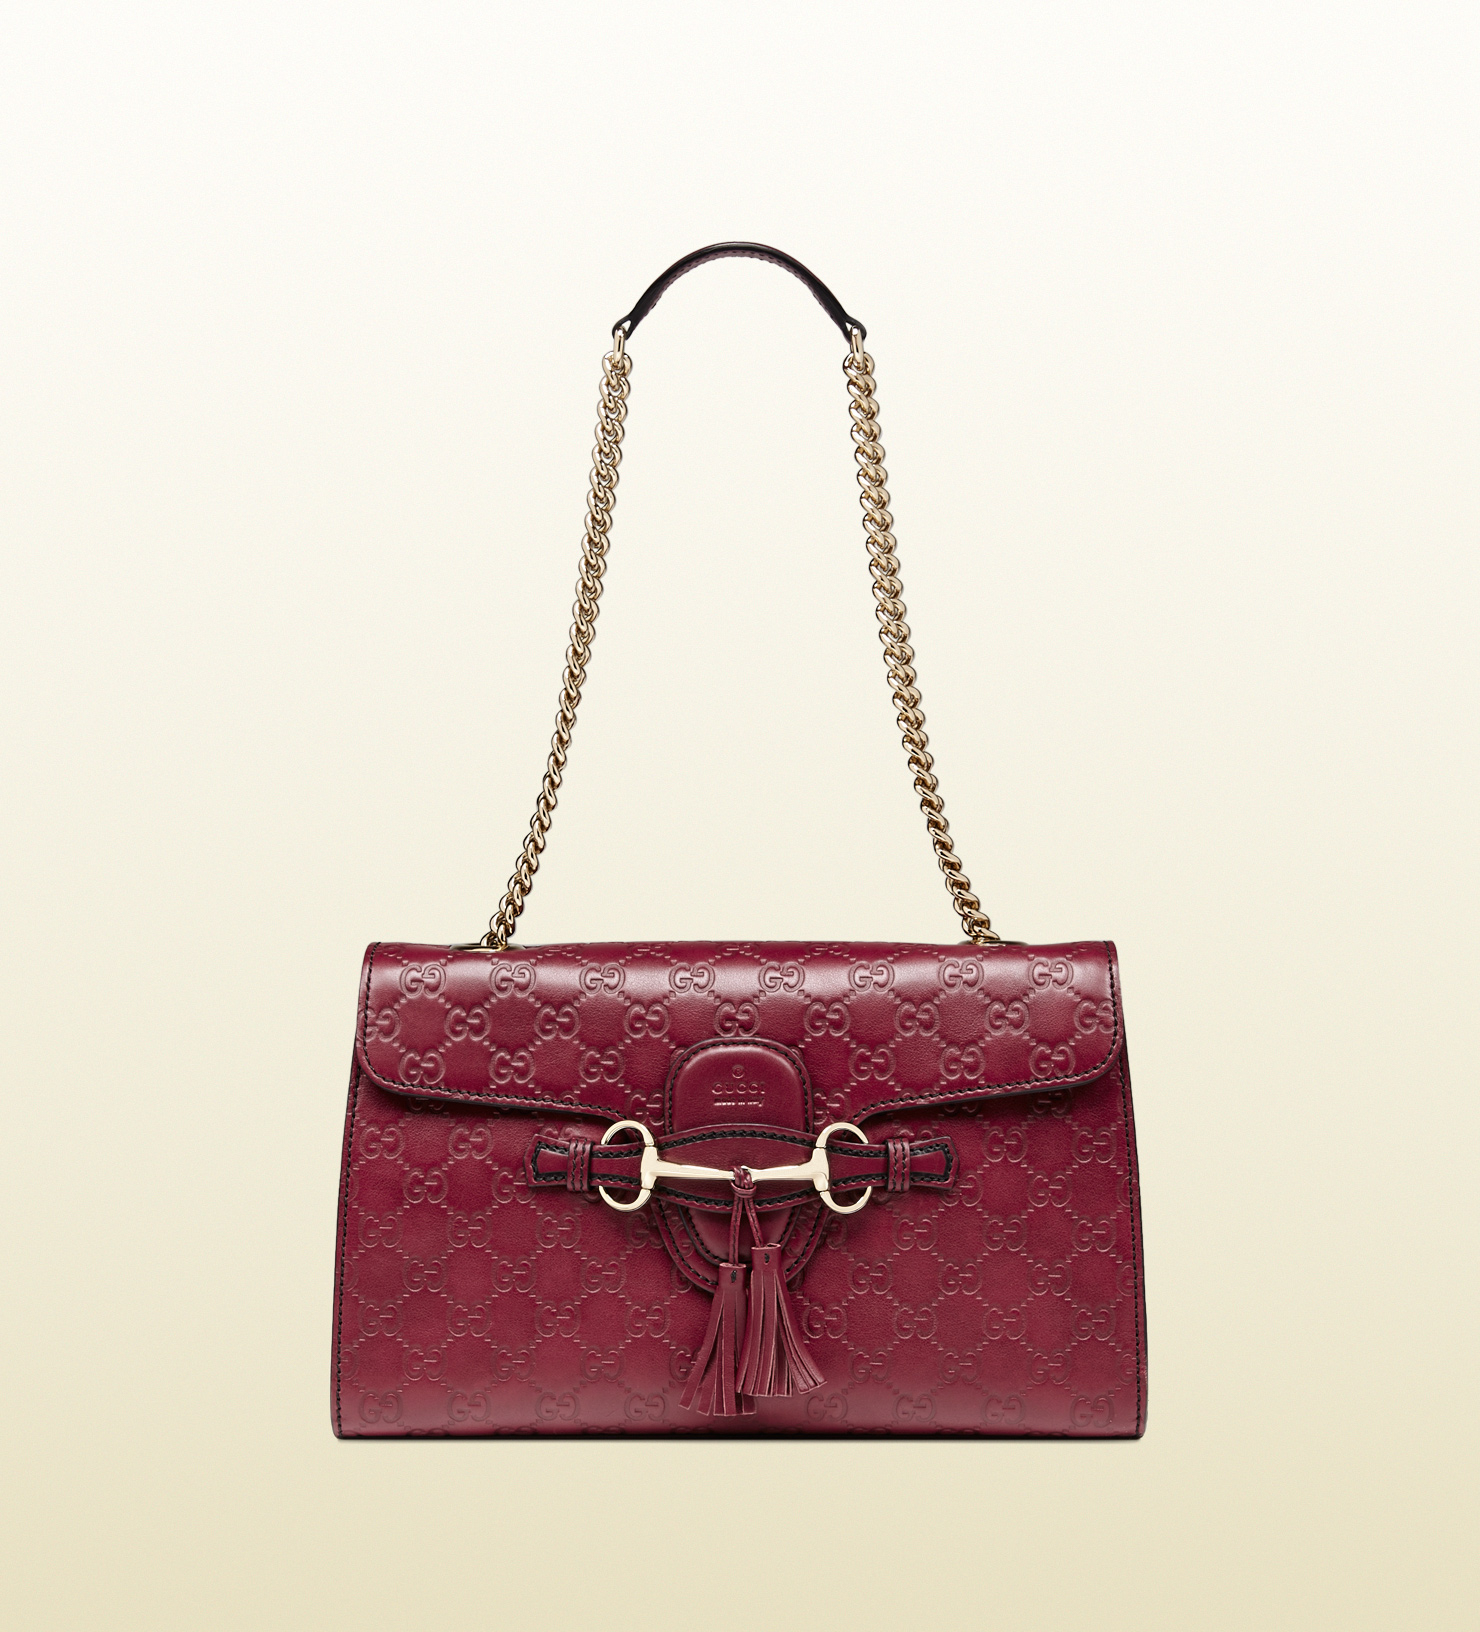 Lyst - Gucci Emily Chain Ssima Leather Shoulder Bag in Red